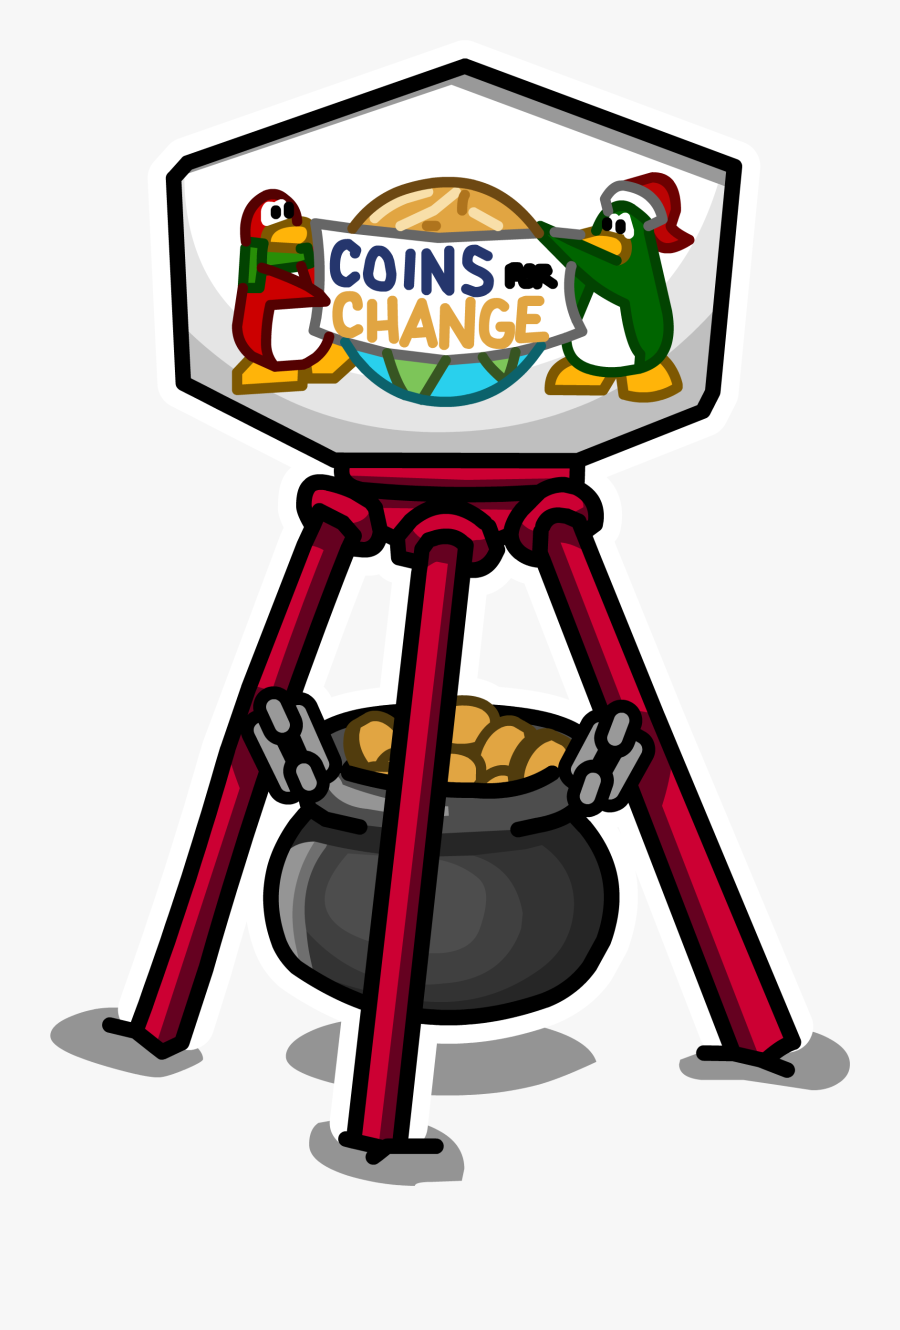 Coins For Change Donation Station Sprite 001 Hover - Club Penguin Coins For Change, Transparent Clipart